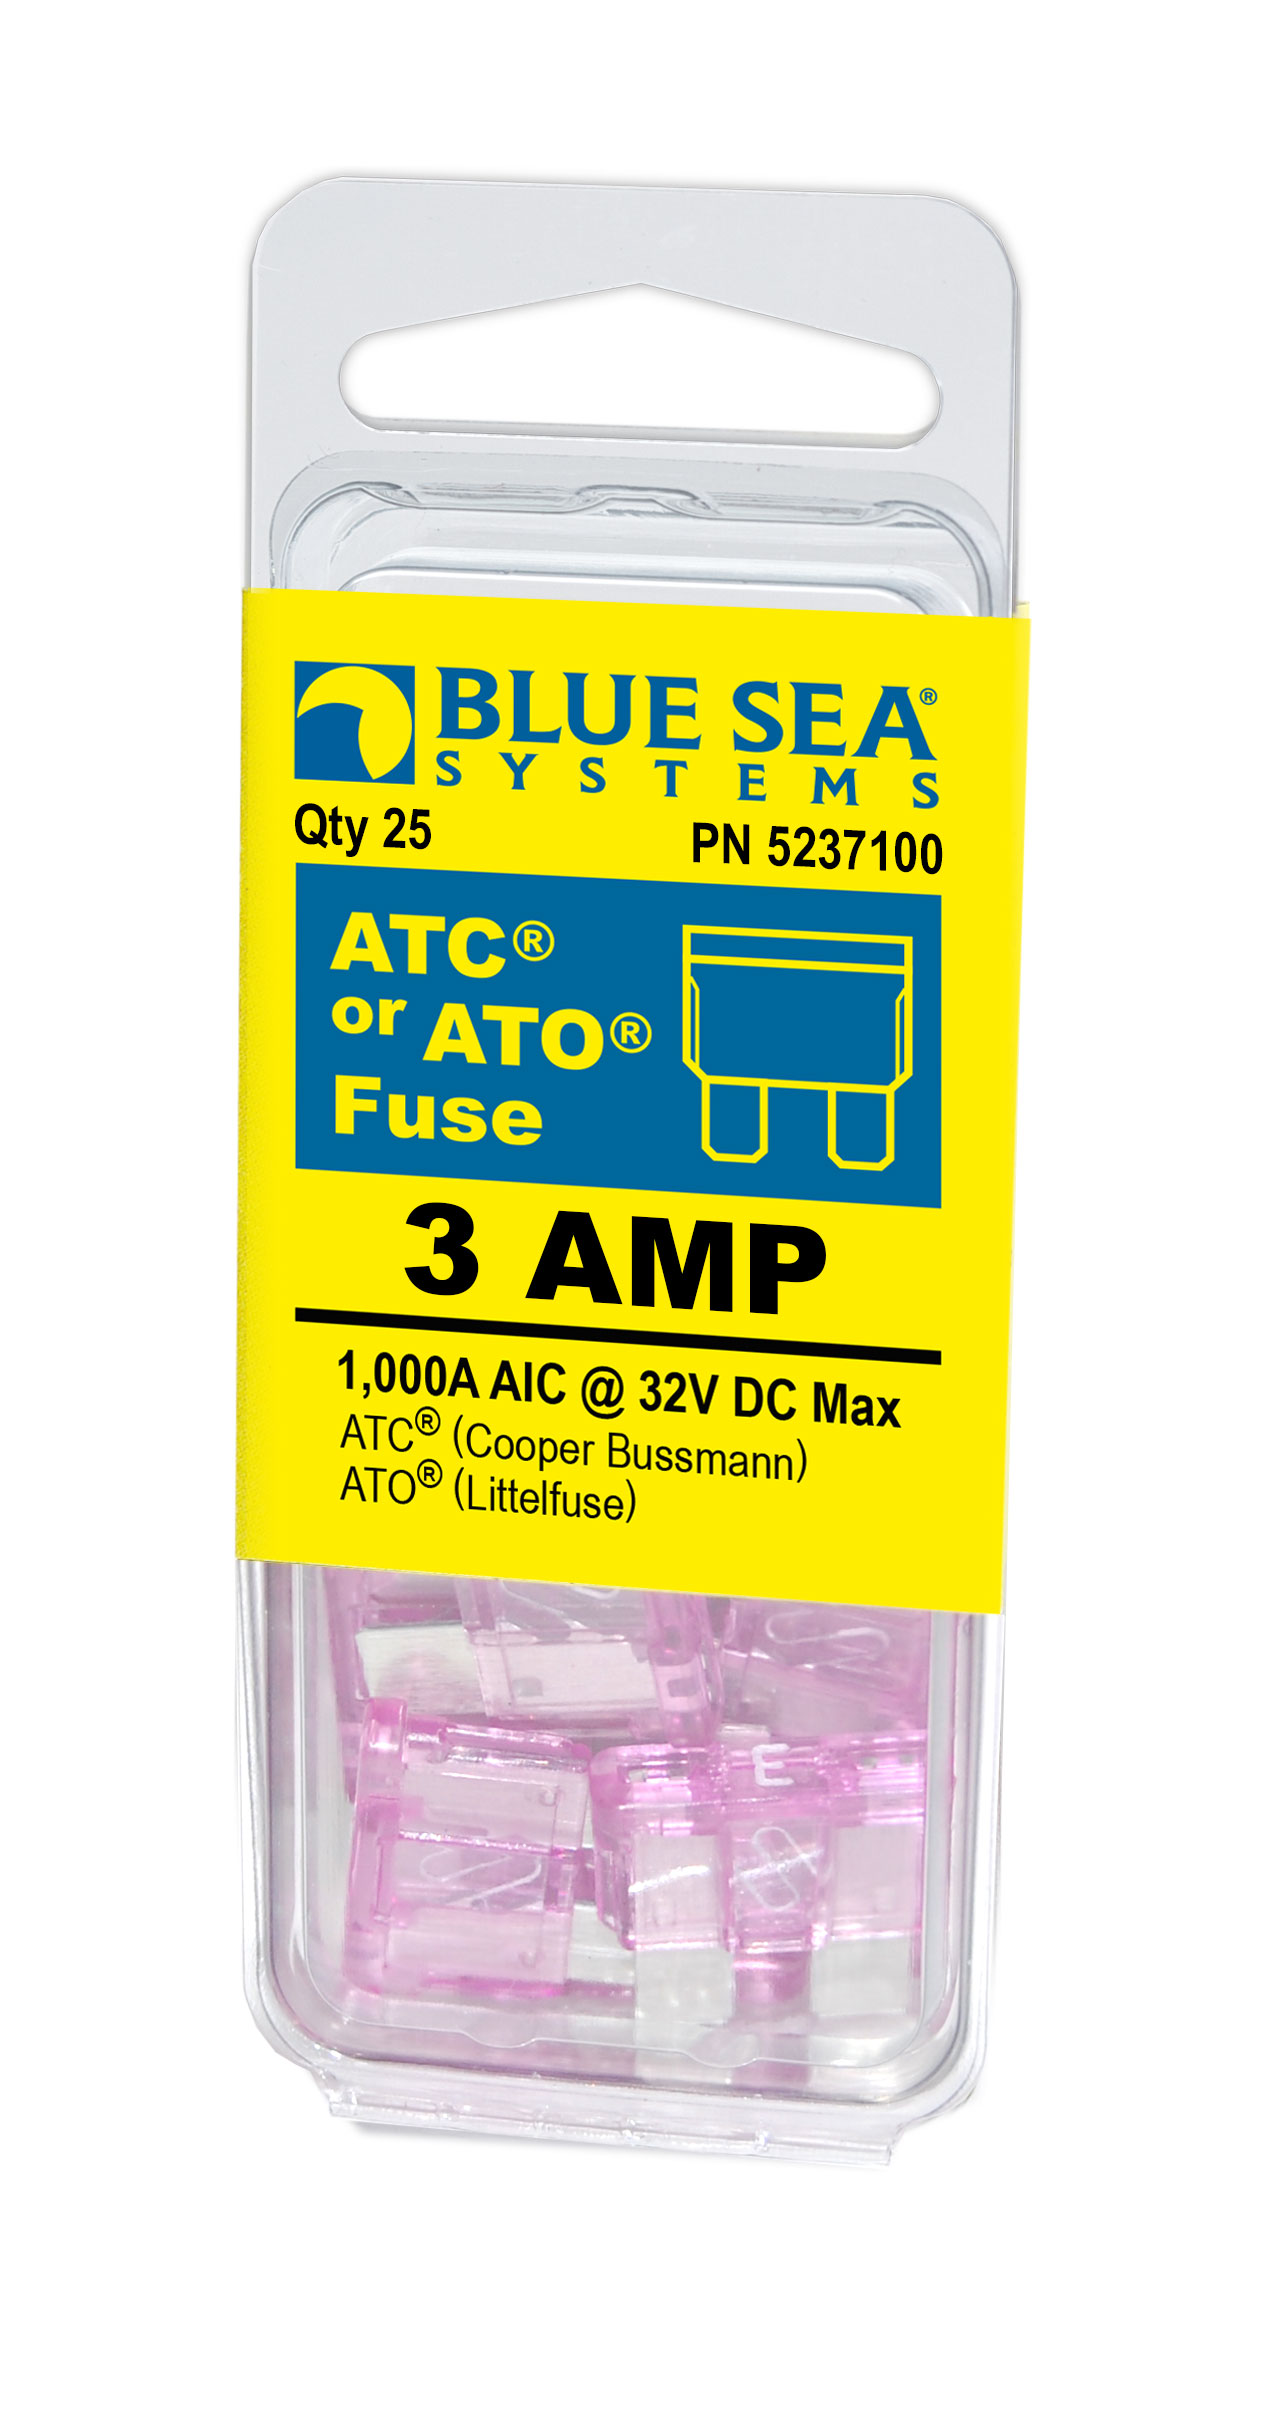 Part # 5237100  Manufacturer Blue Sea Systems  Product Type Fuse